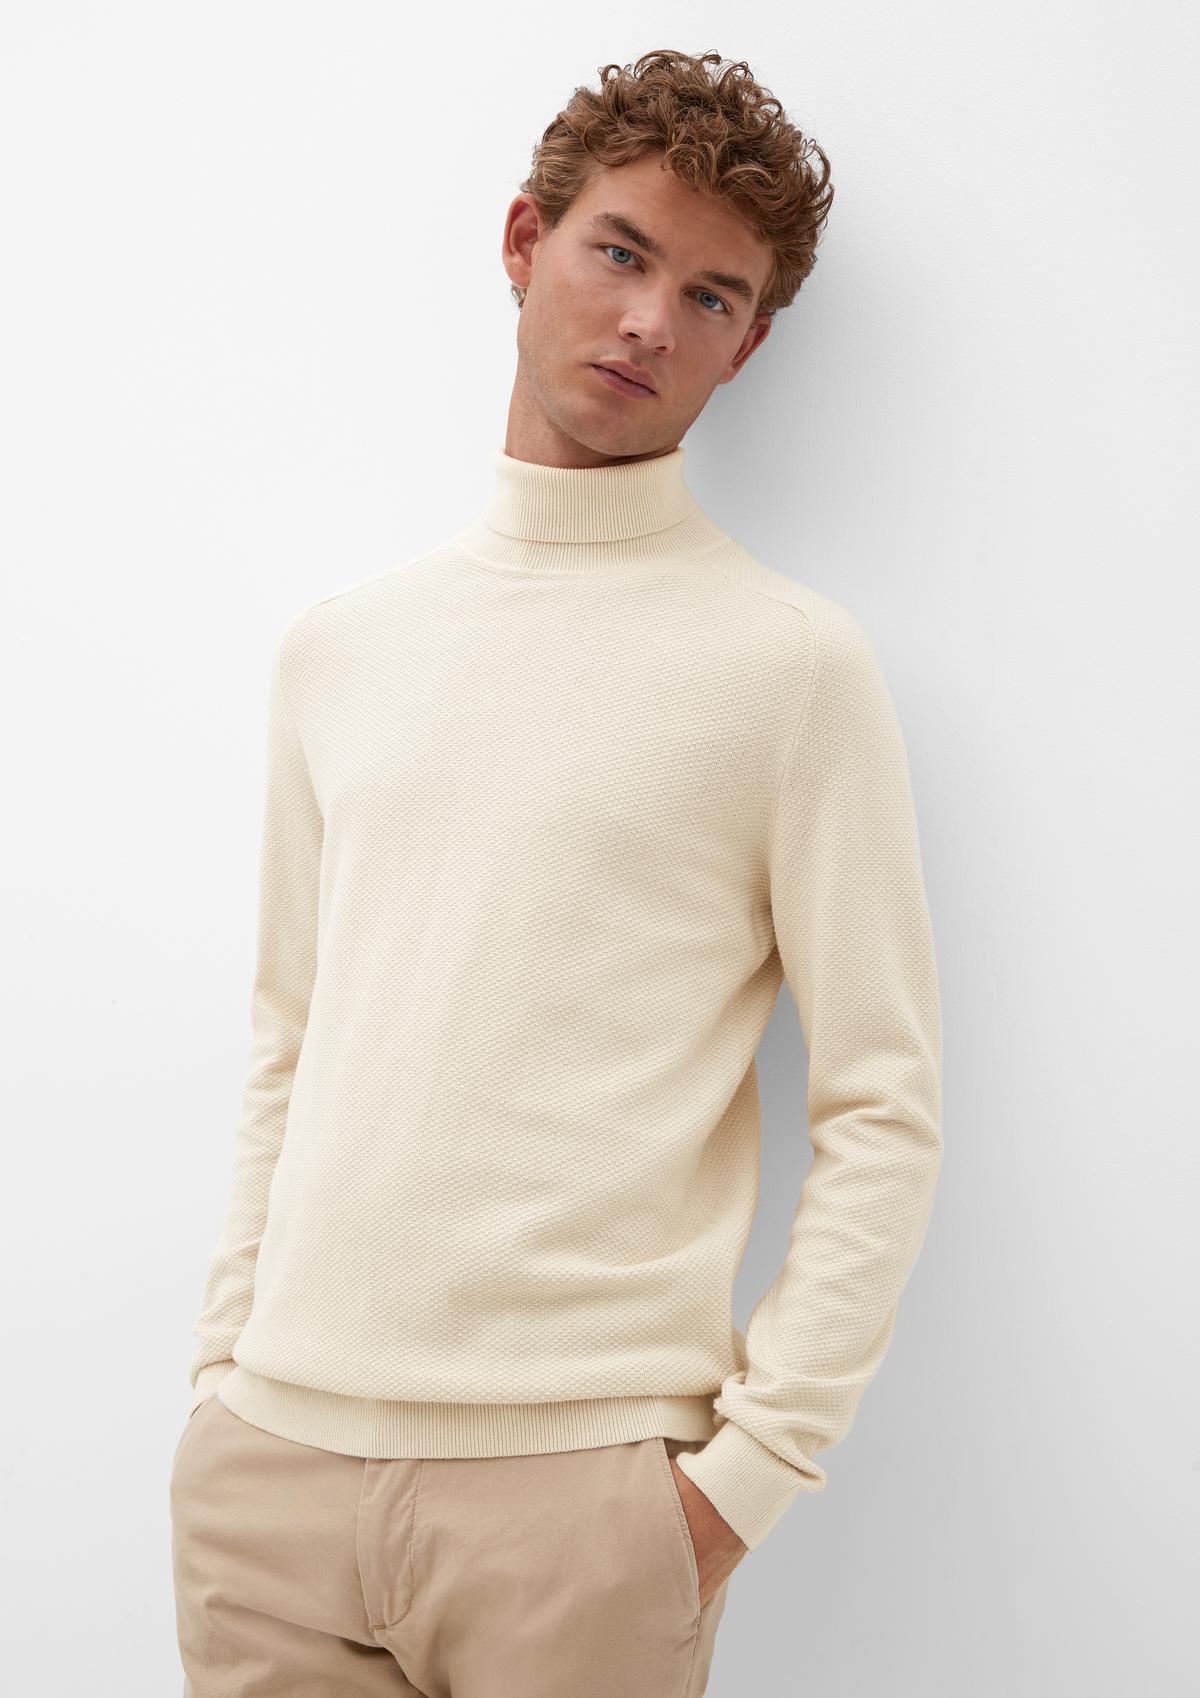 Polo neck jumper with a knit pattern